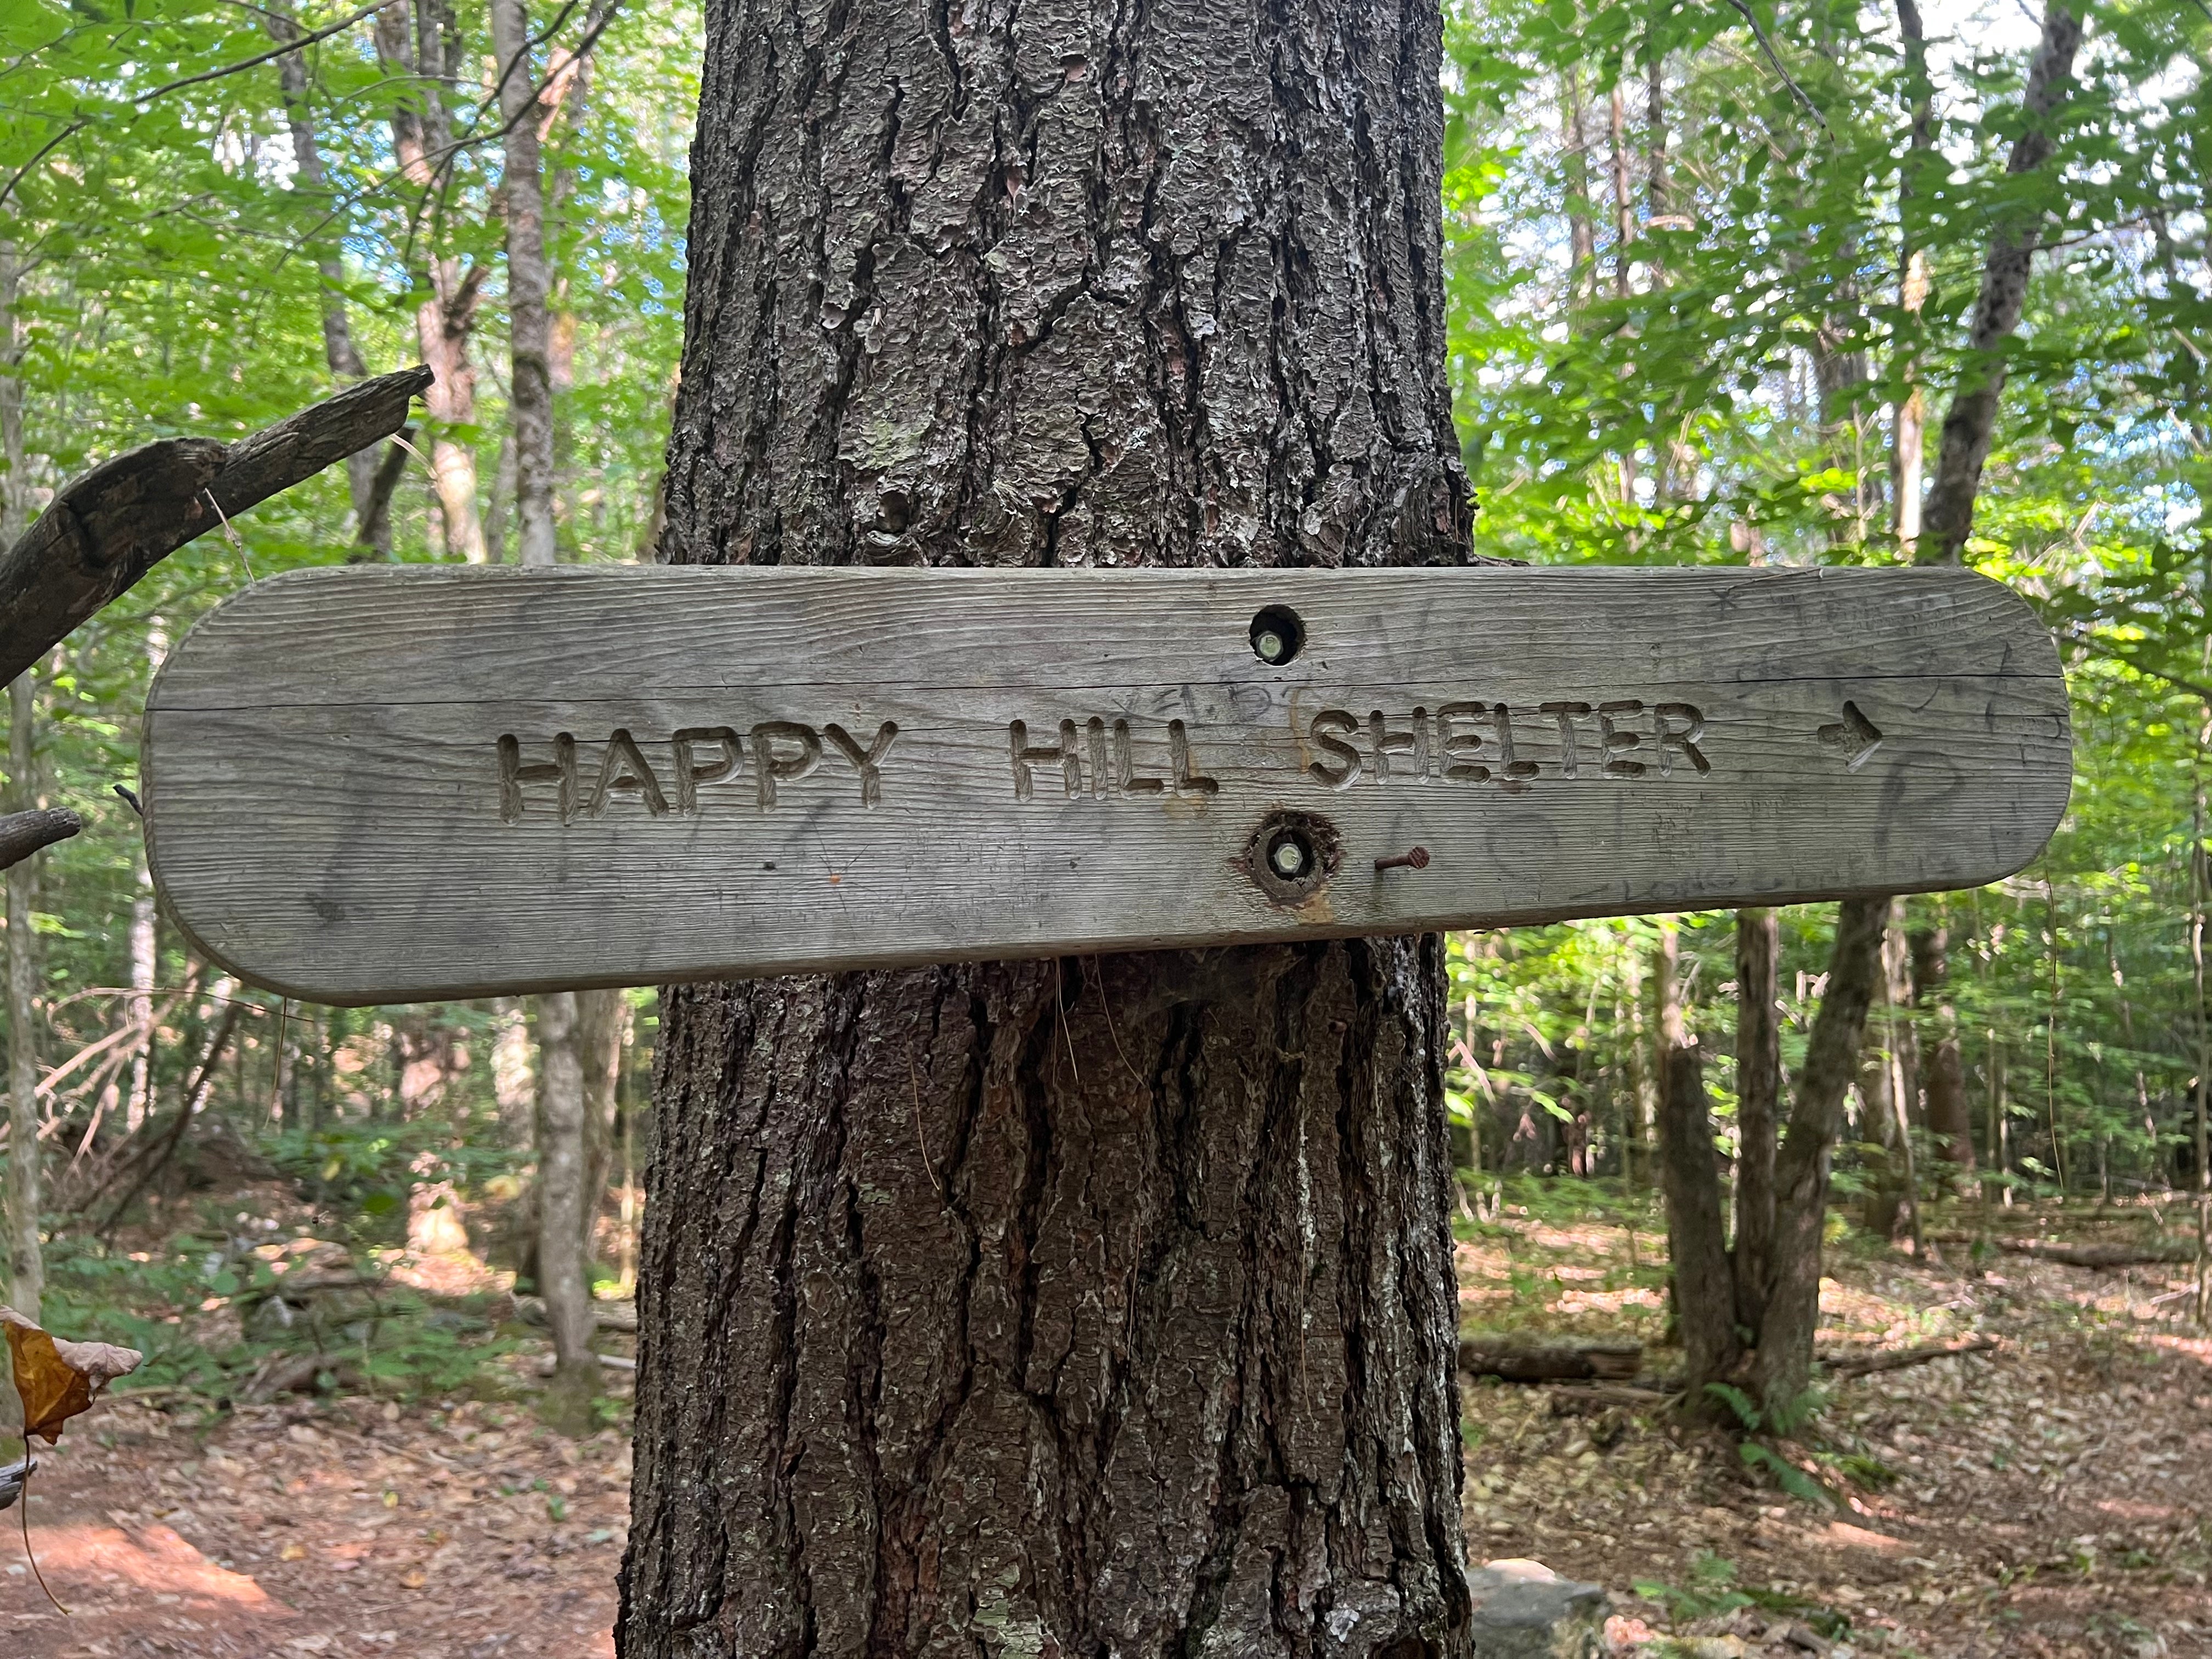 Camper submitted image from Happy Hill Backcountry Shelter on the AT in Vermont — Appalachian National Scenic Trail - 2